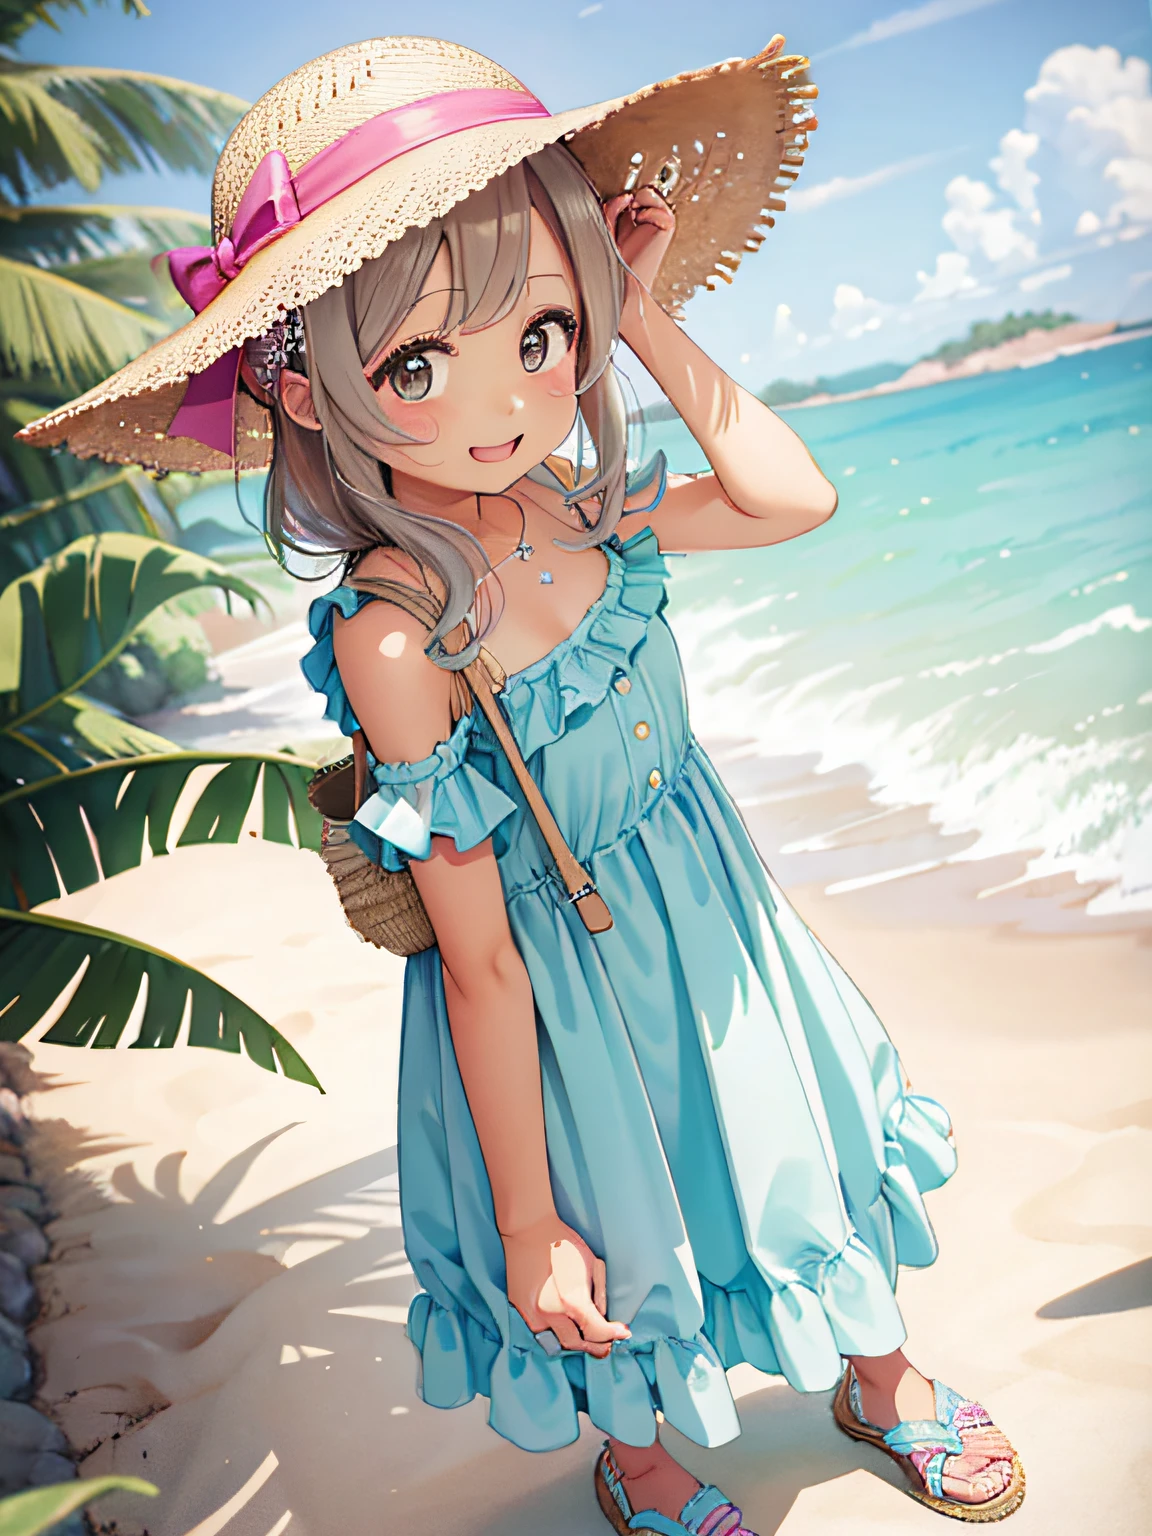 Detailed background、top-quality、the beach、20 generations of beauties 3 people、Cute hairstyle、huge-breasted、Smiling、Feminine and cool one-piece style、Choose a flared skirt or maxi dress、Choose cool materials、Pair your feet with sandals or espadrilles、Add a resort feel with a straw hat or tote bag.、Bright colors and patterns、By incorporating ruffles and lace details、Creates a feminine glamour